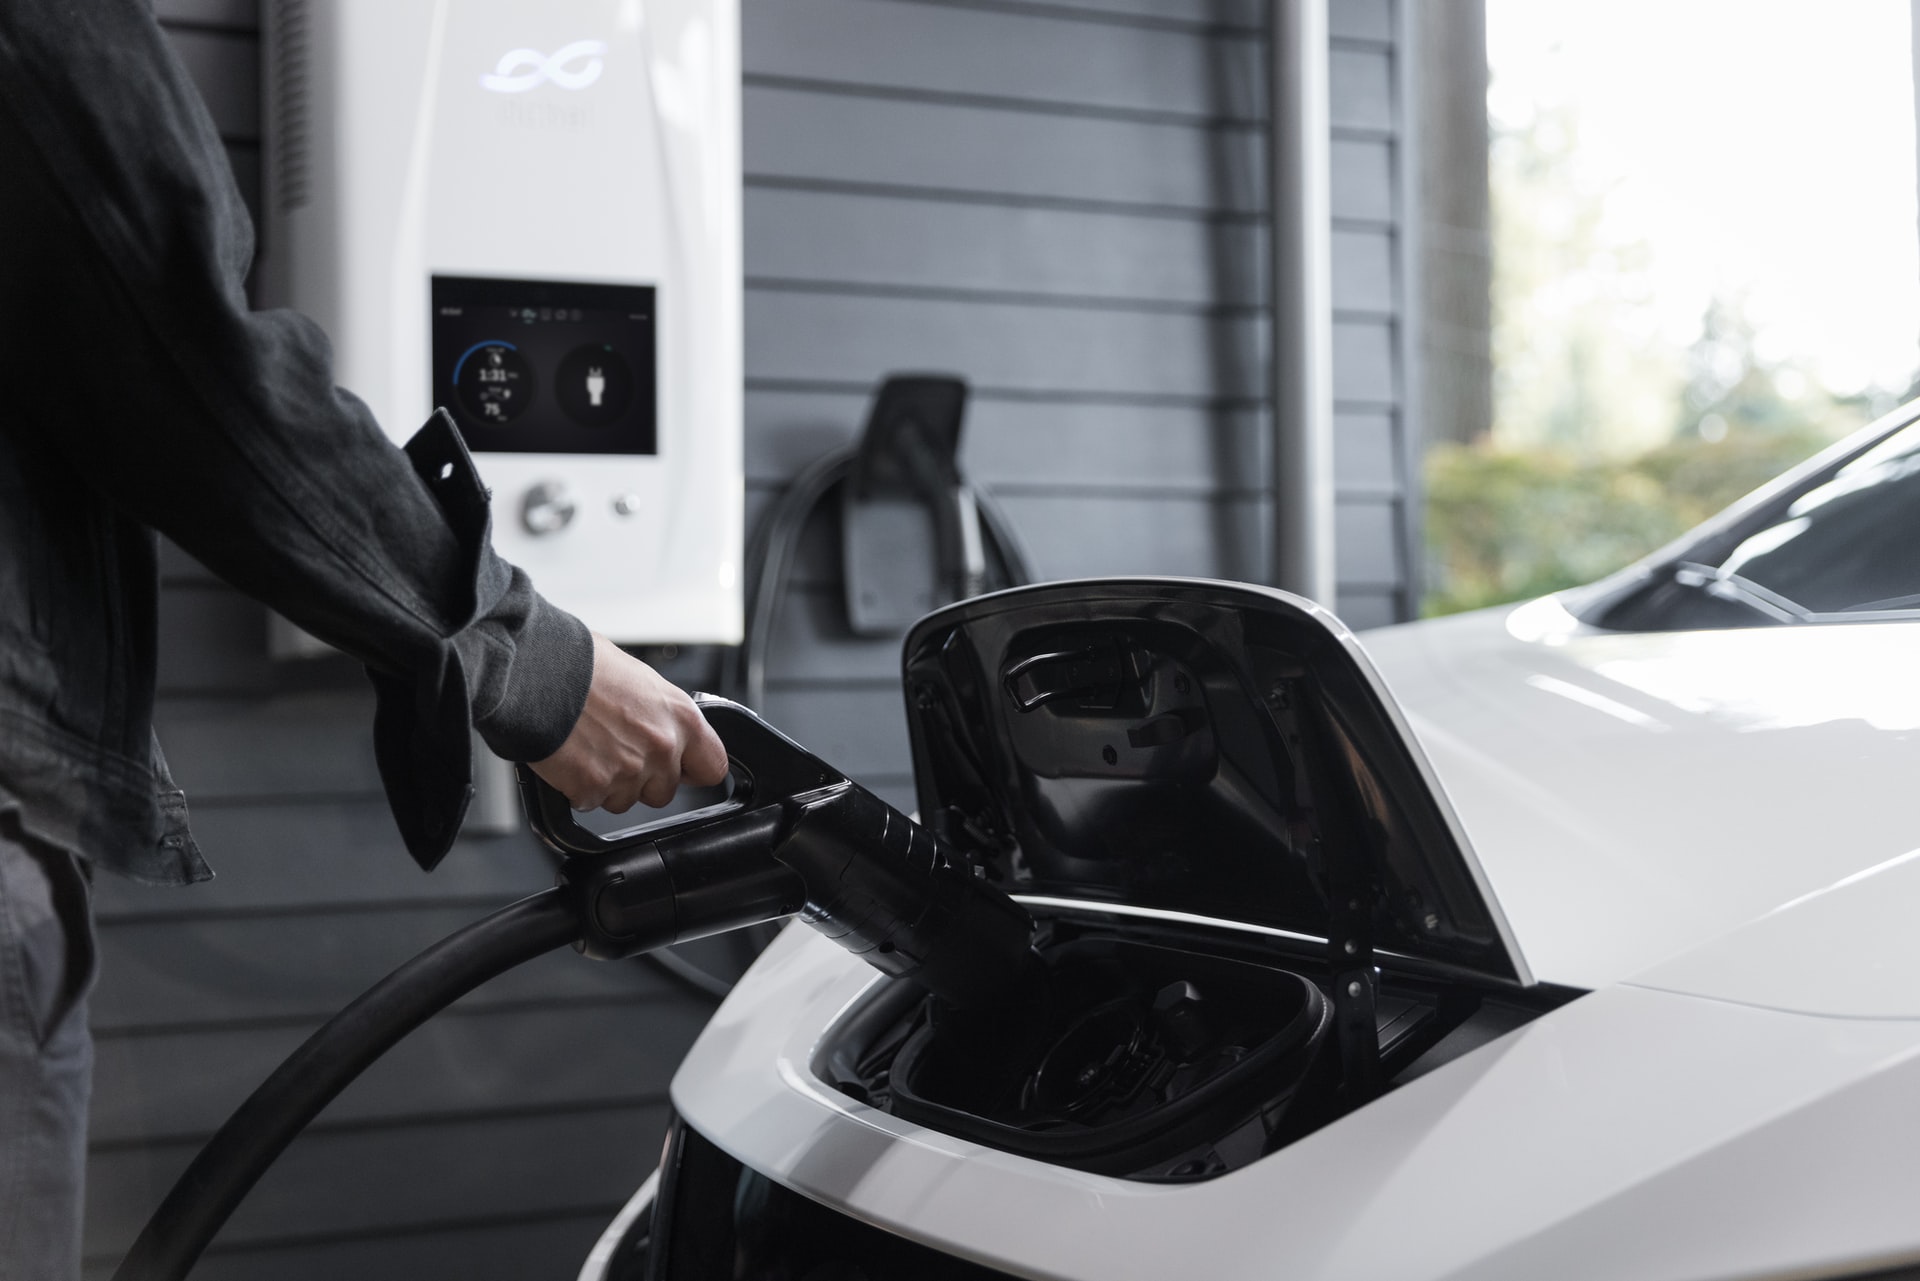 electric vehicles need lithium batteries to operate